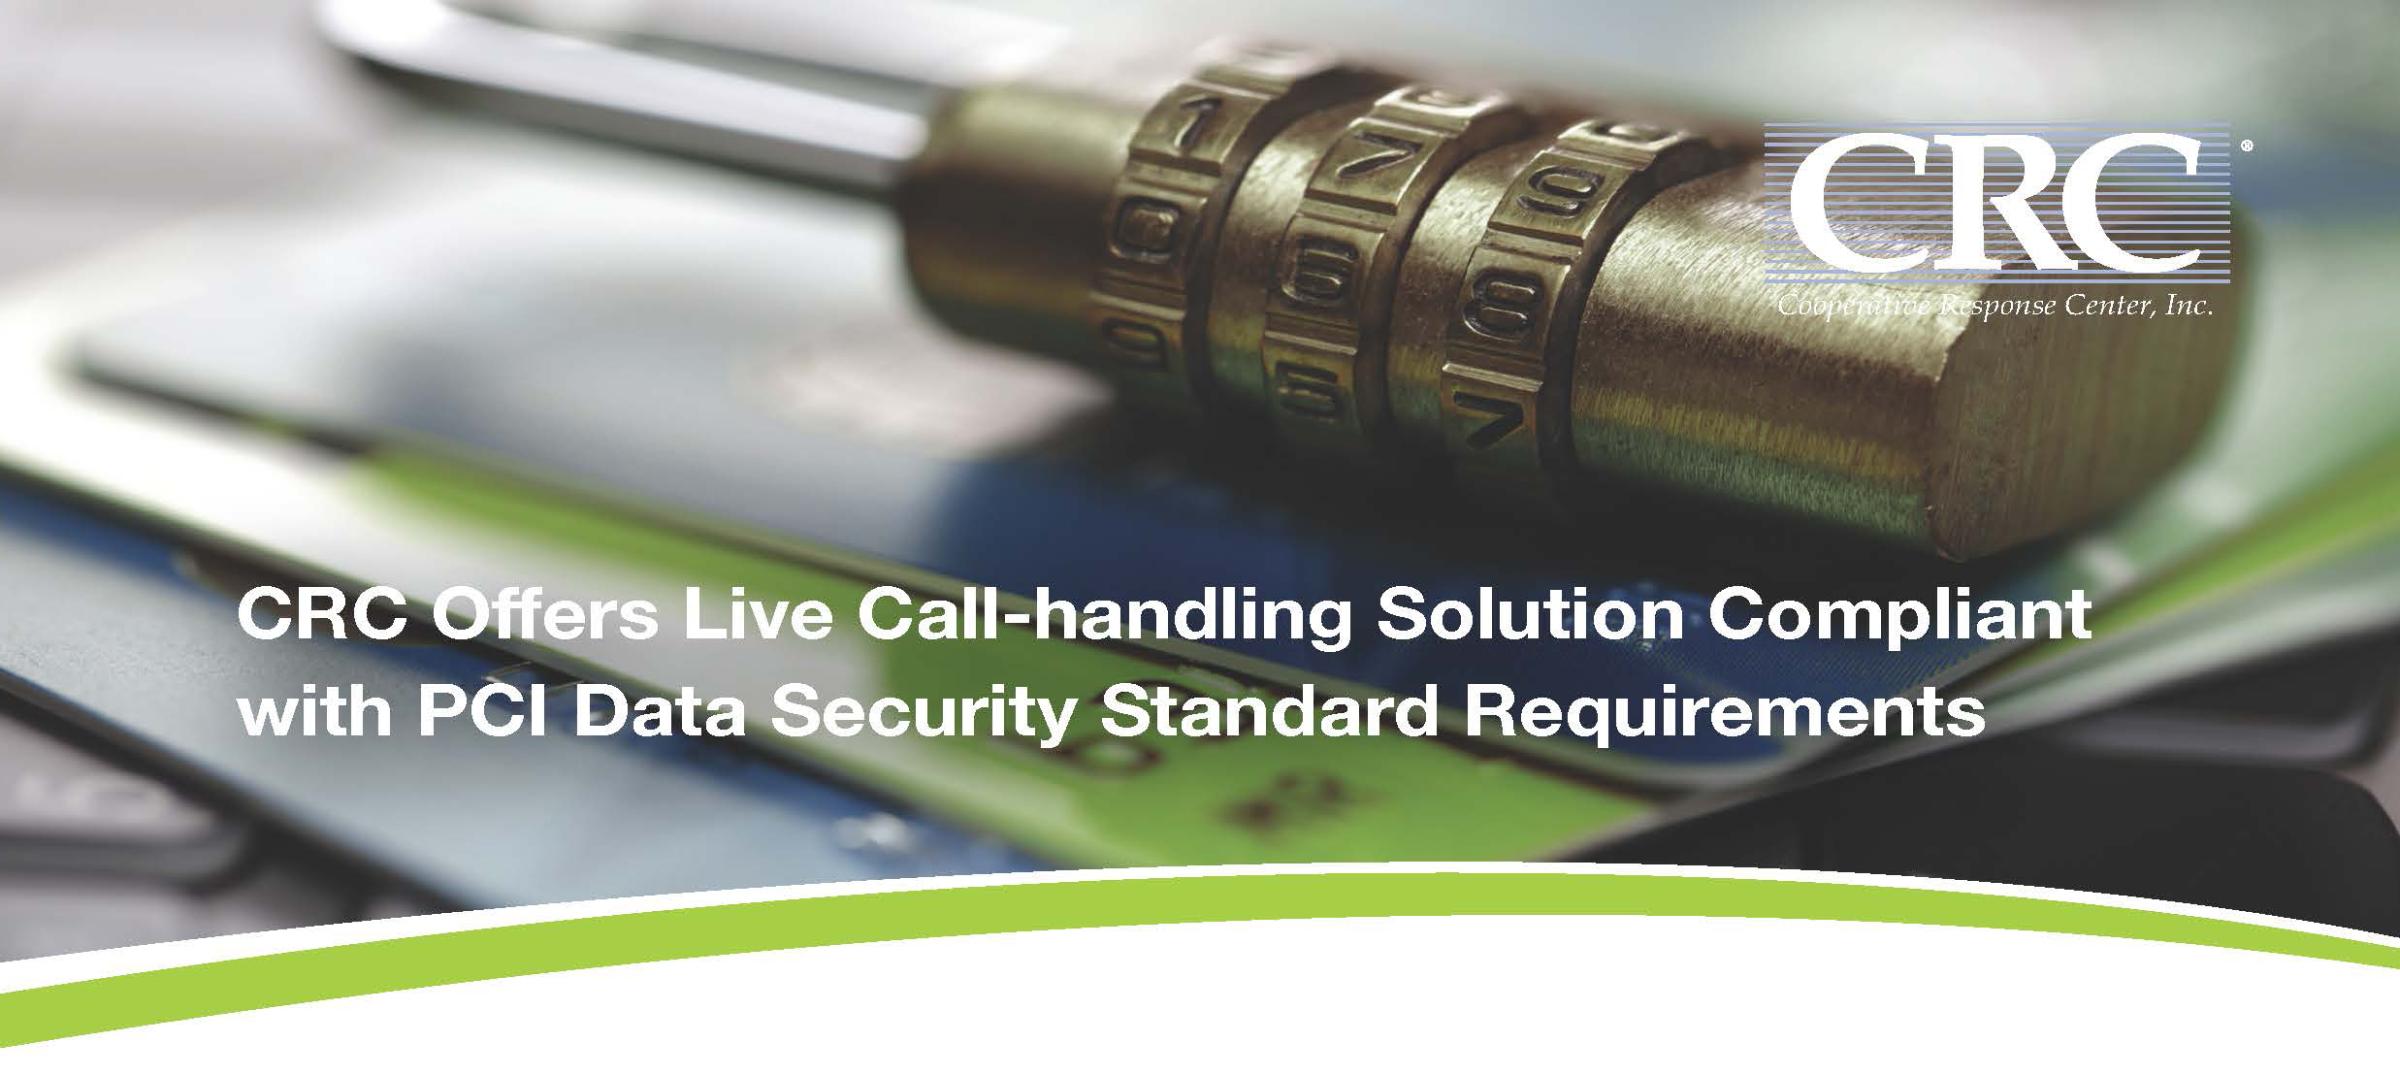 CRC Offers Live Call-handling Solution that Complies with PCI Data Security Standard Requirements